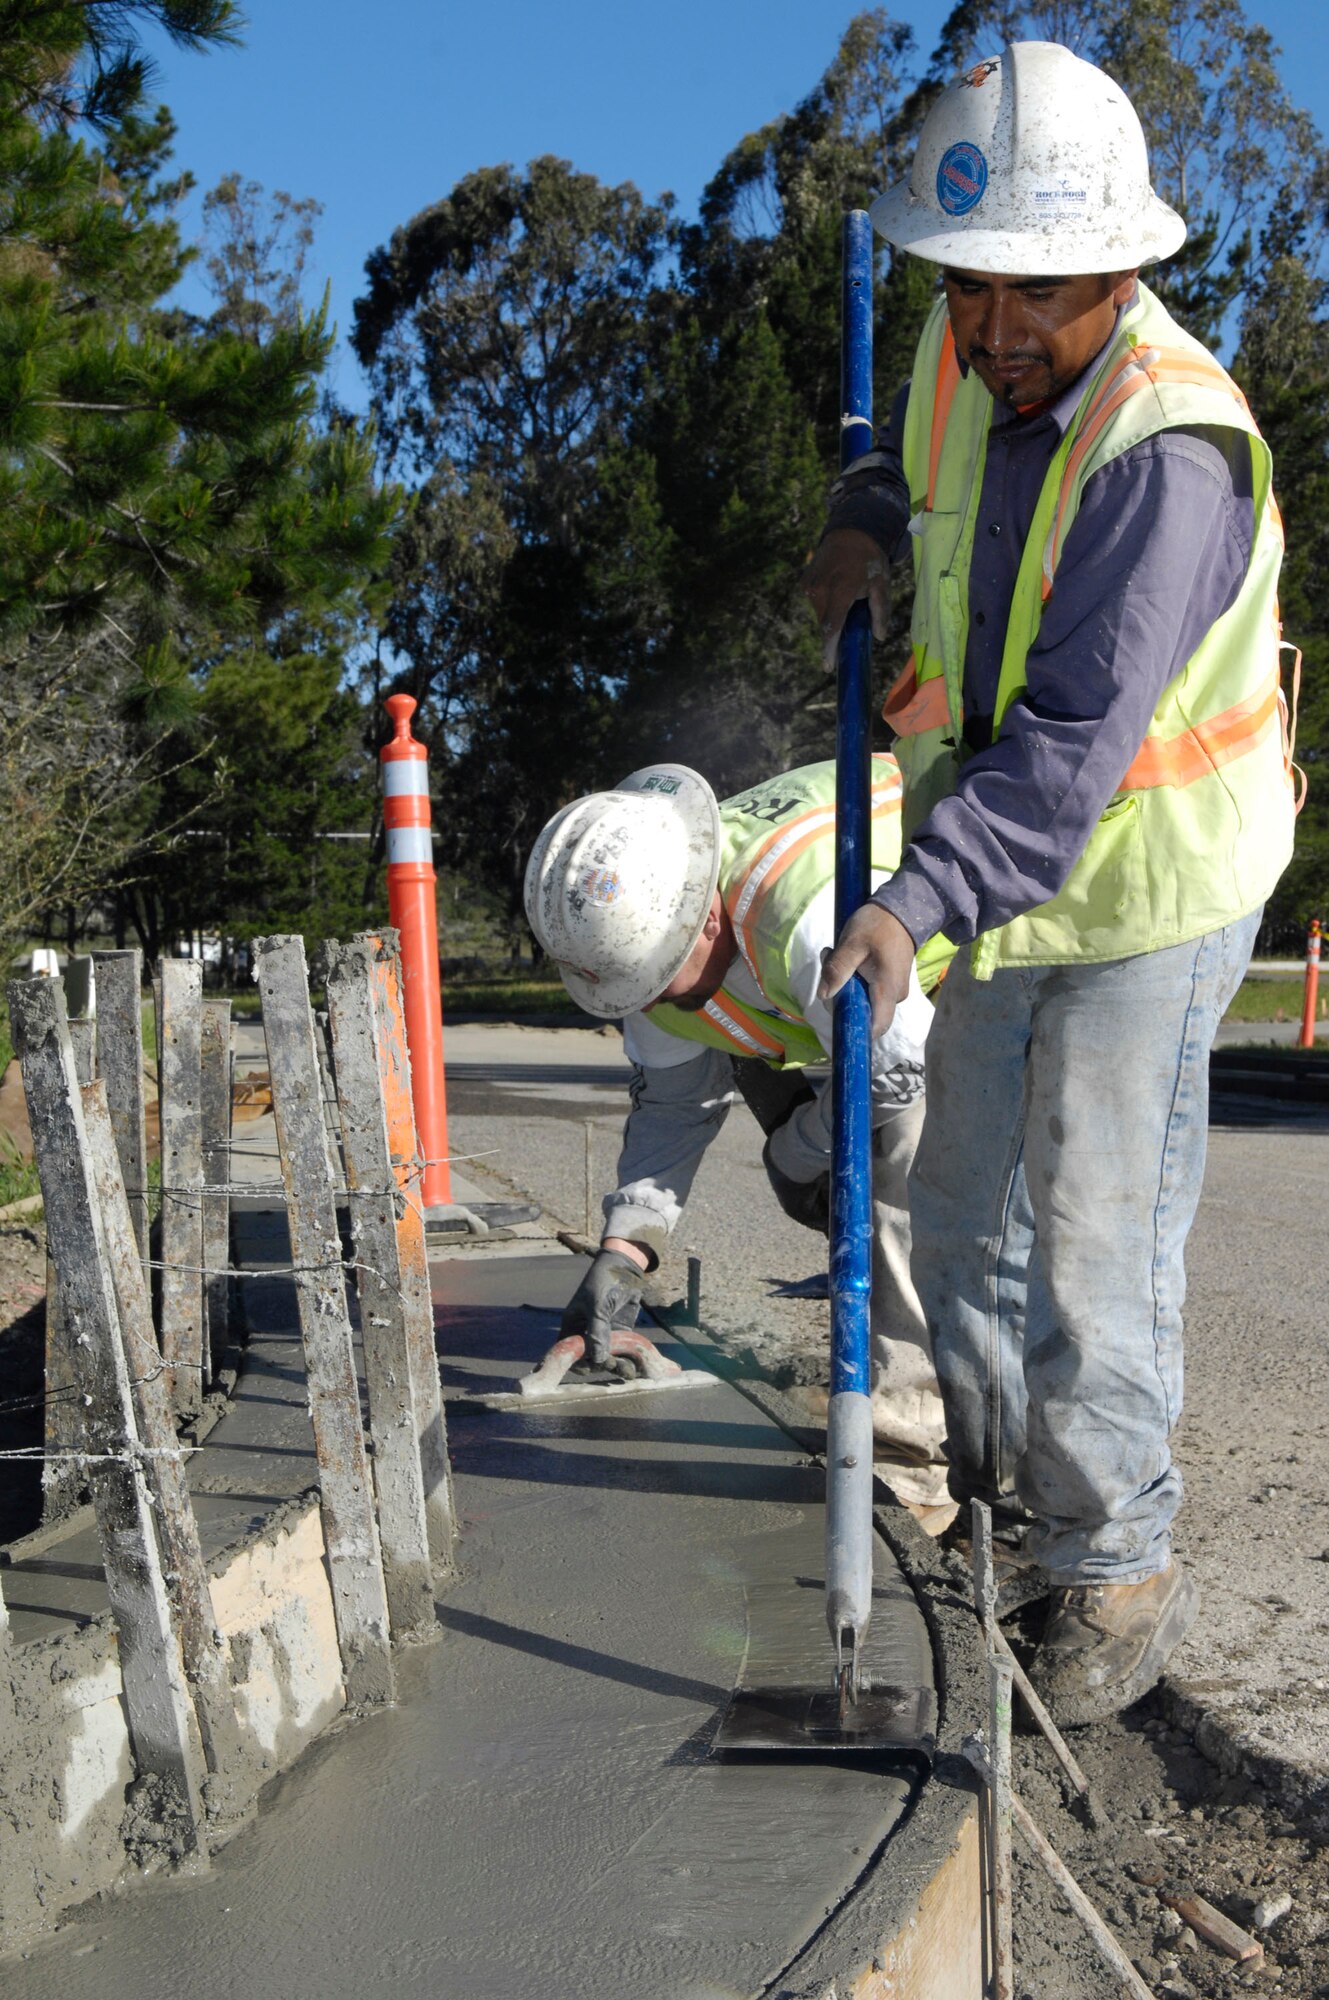 VANDENBERG AIR FORCE BASE, Calif.  – Ismael Maldonado lines out the curve as Donny Snyder smoothes out the freshly poured concrete at the 30th Space Communications Squadron here Thursday, April 8, 2010.  Rockwood Construction was awarded the contract to make some much needed repairs to the parking lot and to give a facelift to add a more modern design. (U.S. Air Force photo/Staff Sgt. Scottie T. McCord)